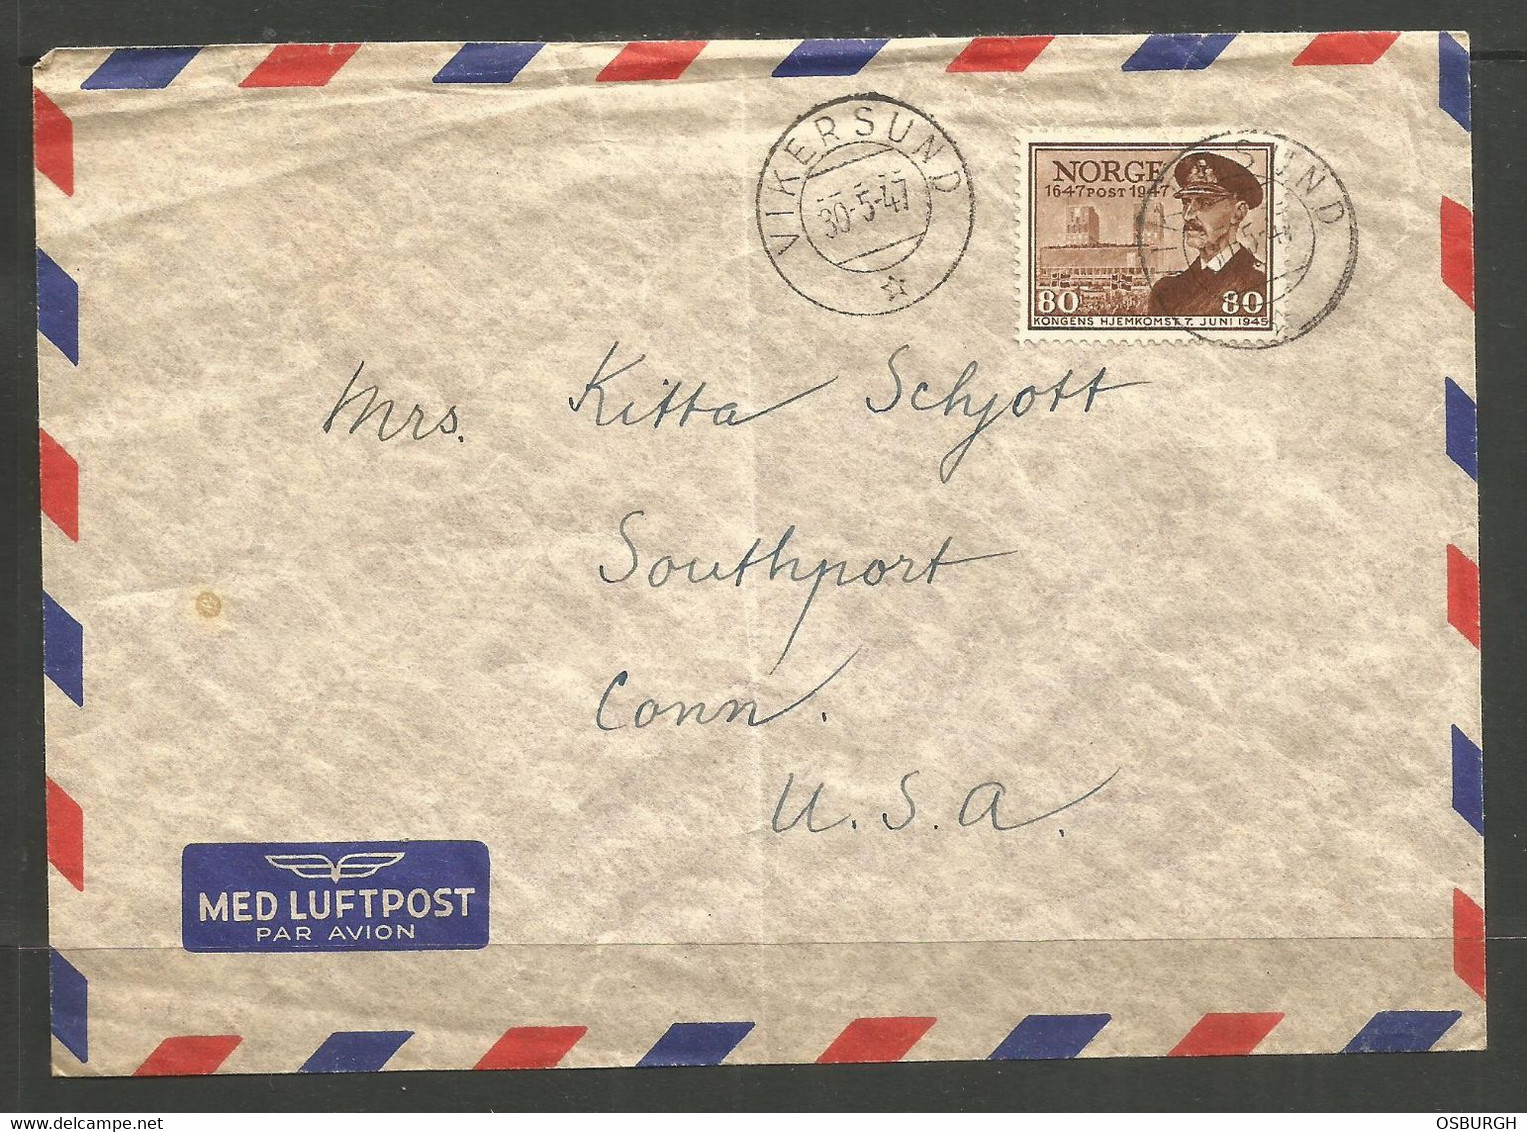 NORWAY. 1947. AIR MAIL COVER. VIKERSUND TO SOUTHPORT CONNECTICUT - Storia Postale